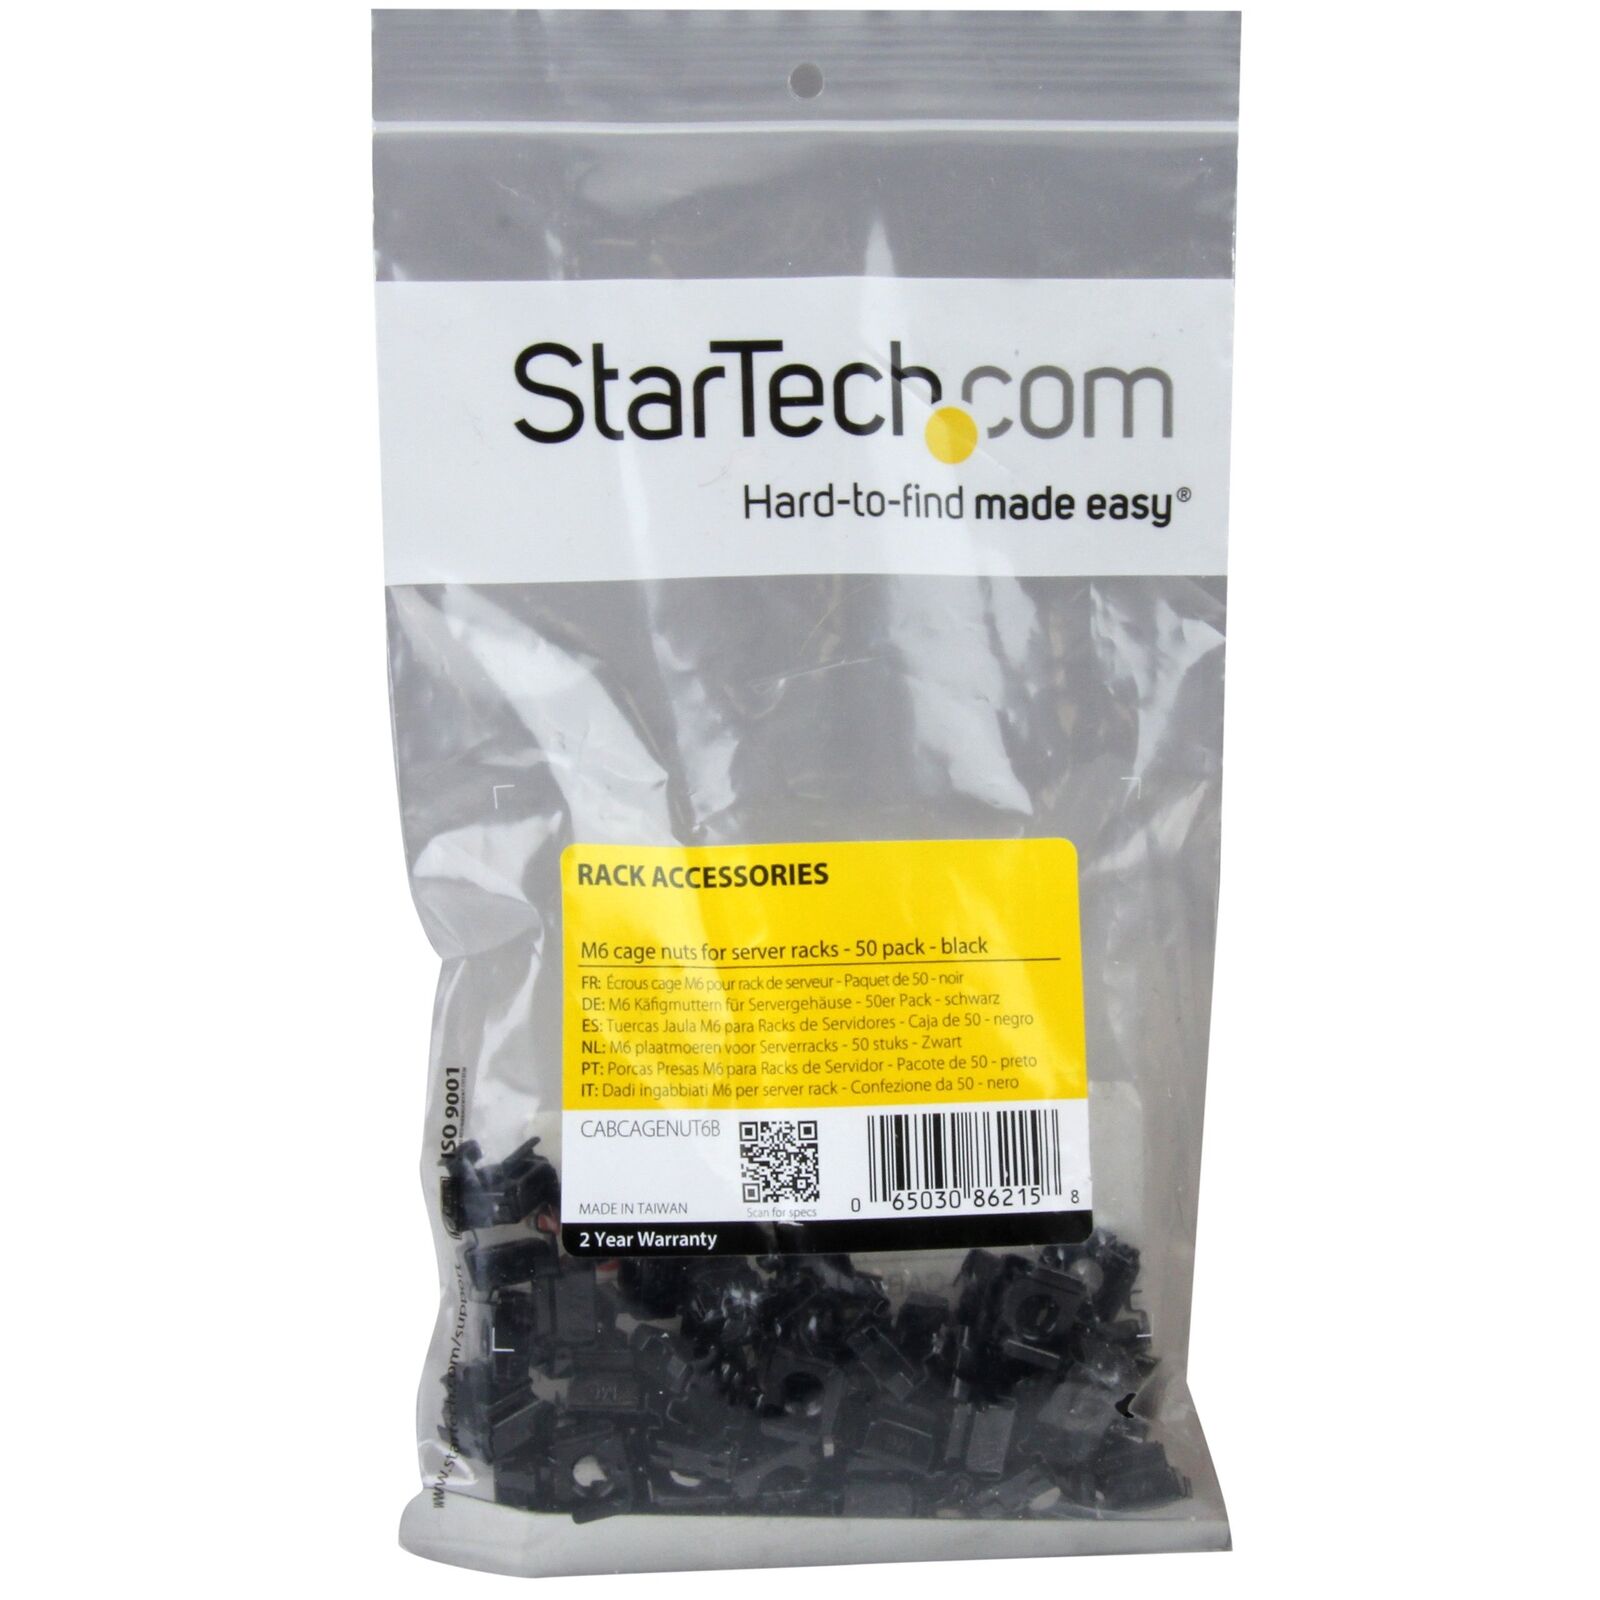 Startech.com M6 Cage Nuts - 50 Pack, Black - M6 Mounting Cage Nuts For Server